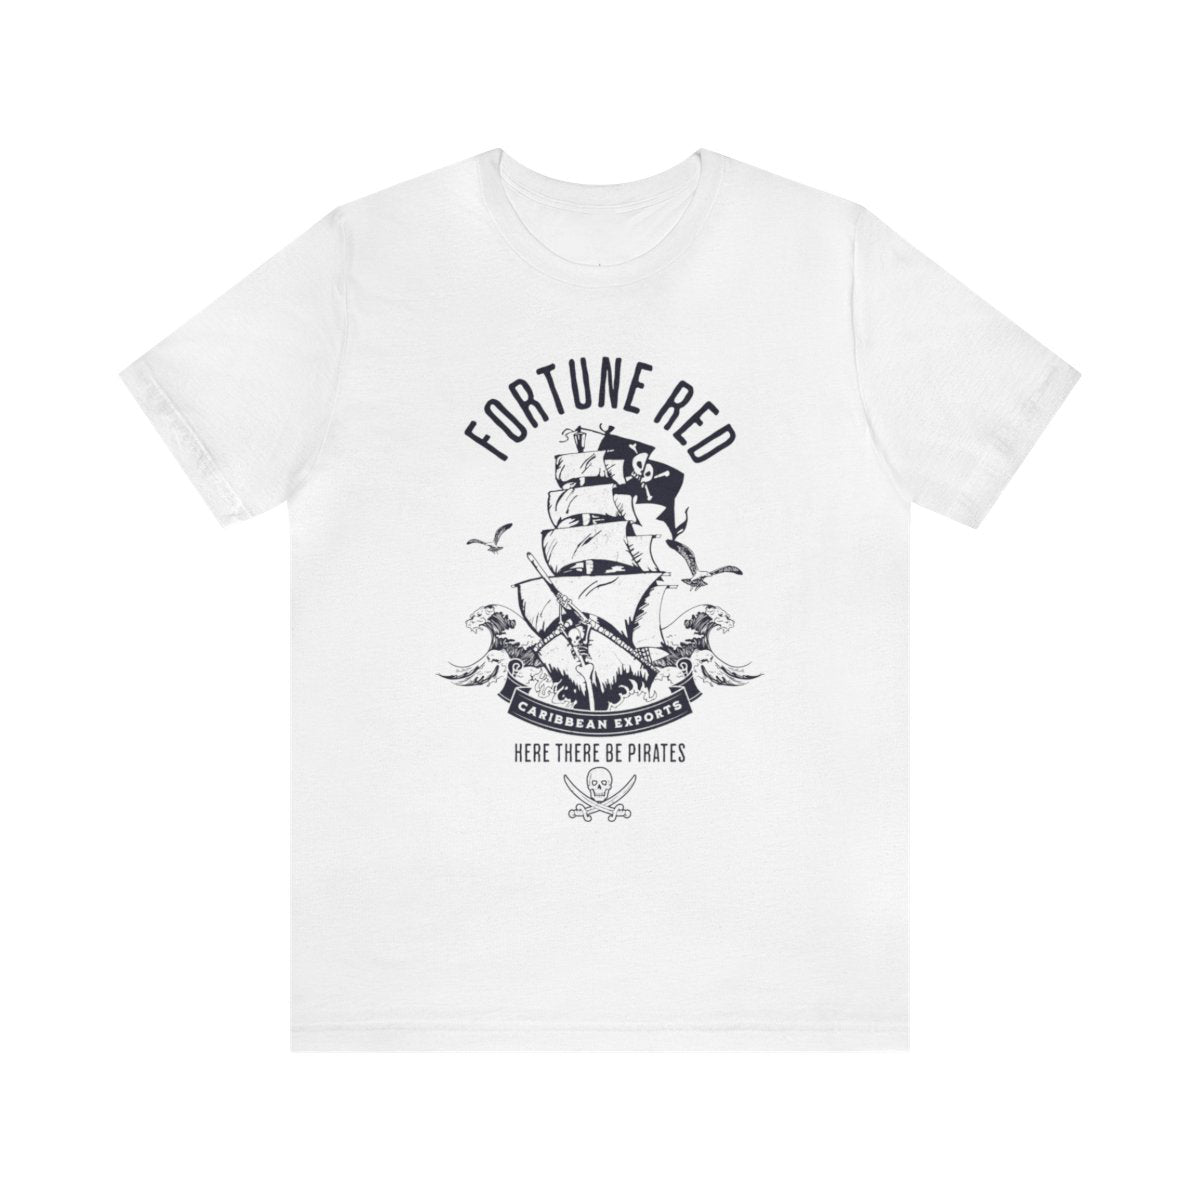 Park Chic Apparel, LLC | Fortune Red Caribbean Pirates Tee - Adult Crew Tee